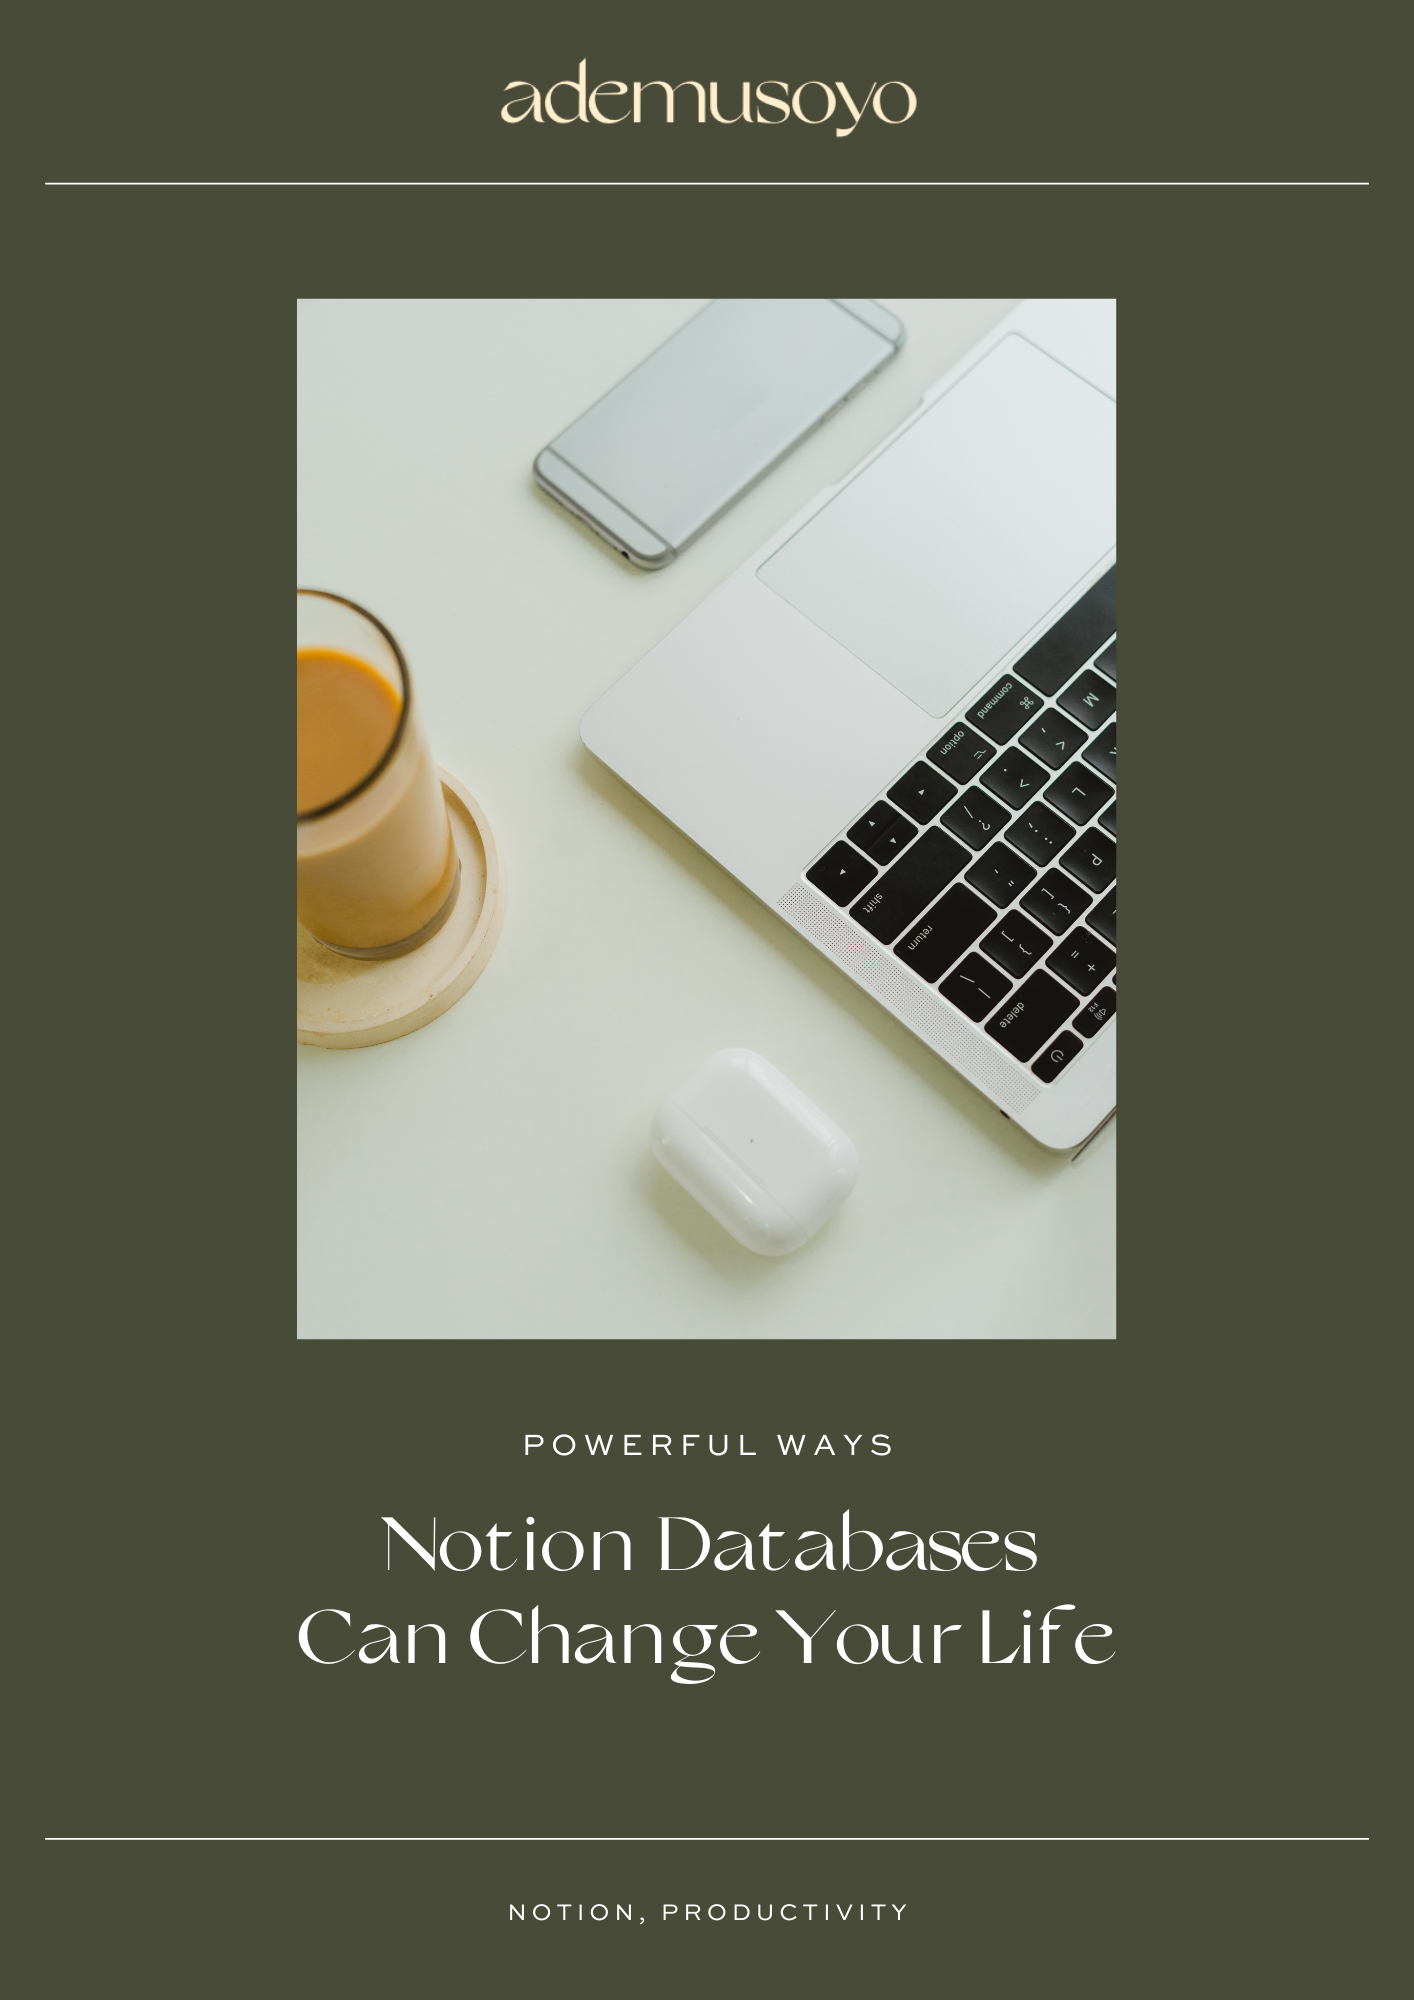 a flat lay image of a laptop with a phone and a glass of coffee on the side with a text overlay at the bottom that says Powerful ways Notion Databases Can Change Your Life